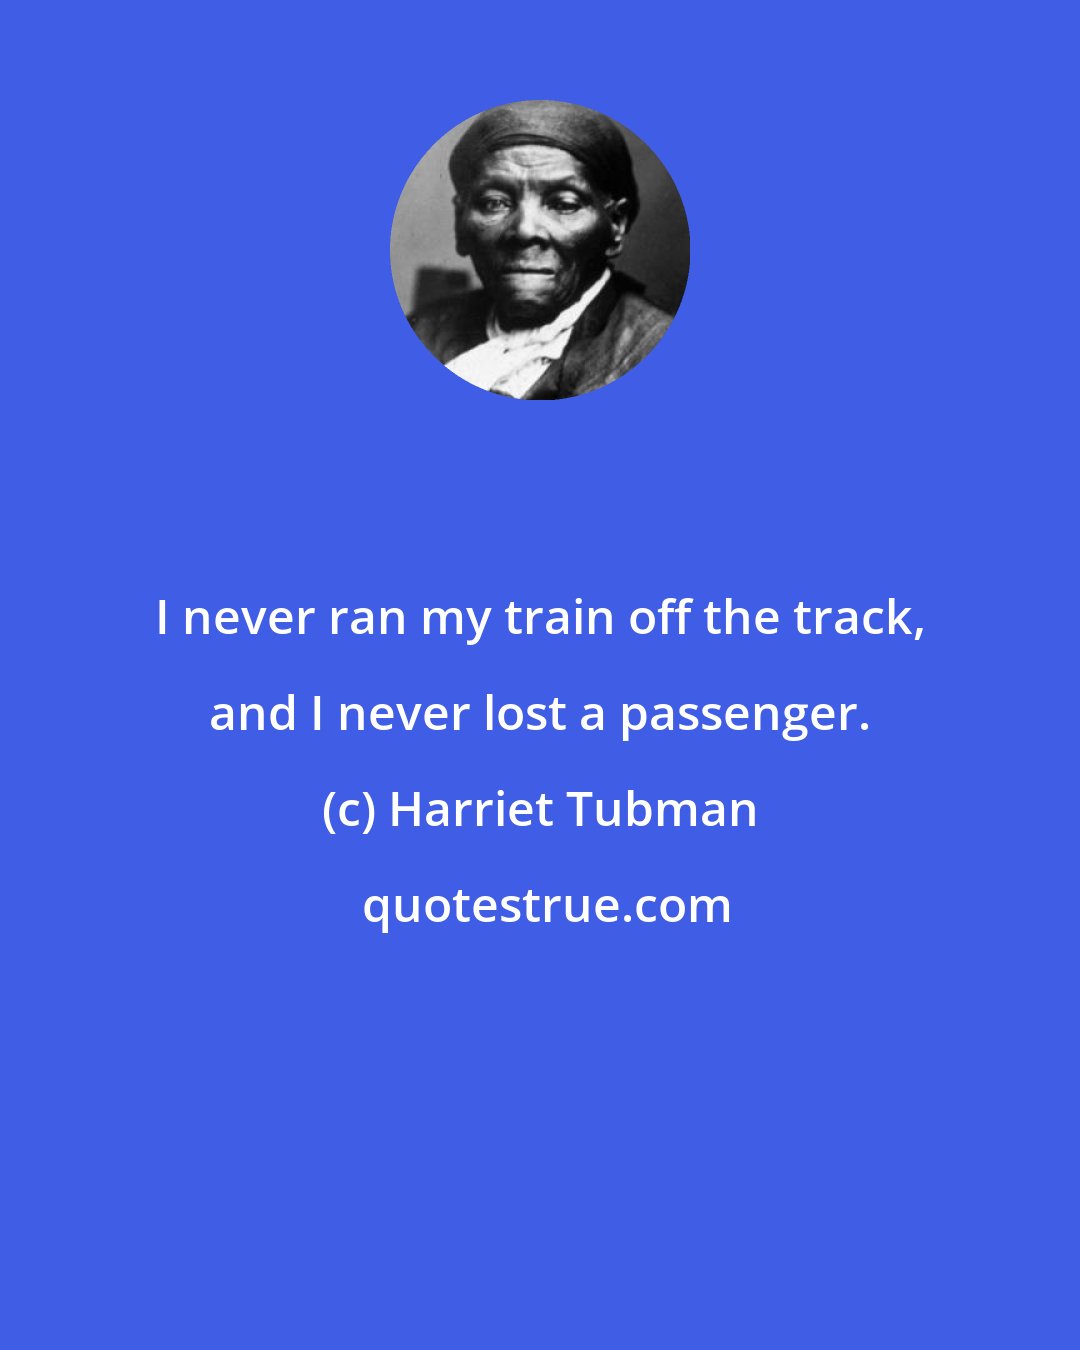 Harriet Tubman: I never ran my train off the track, and I never lost a passenger.